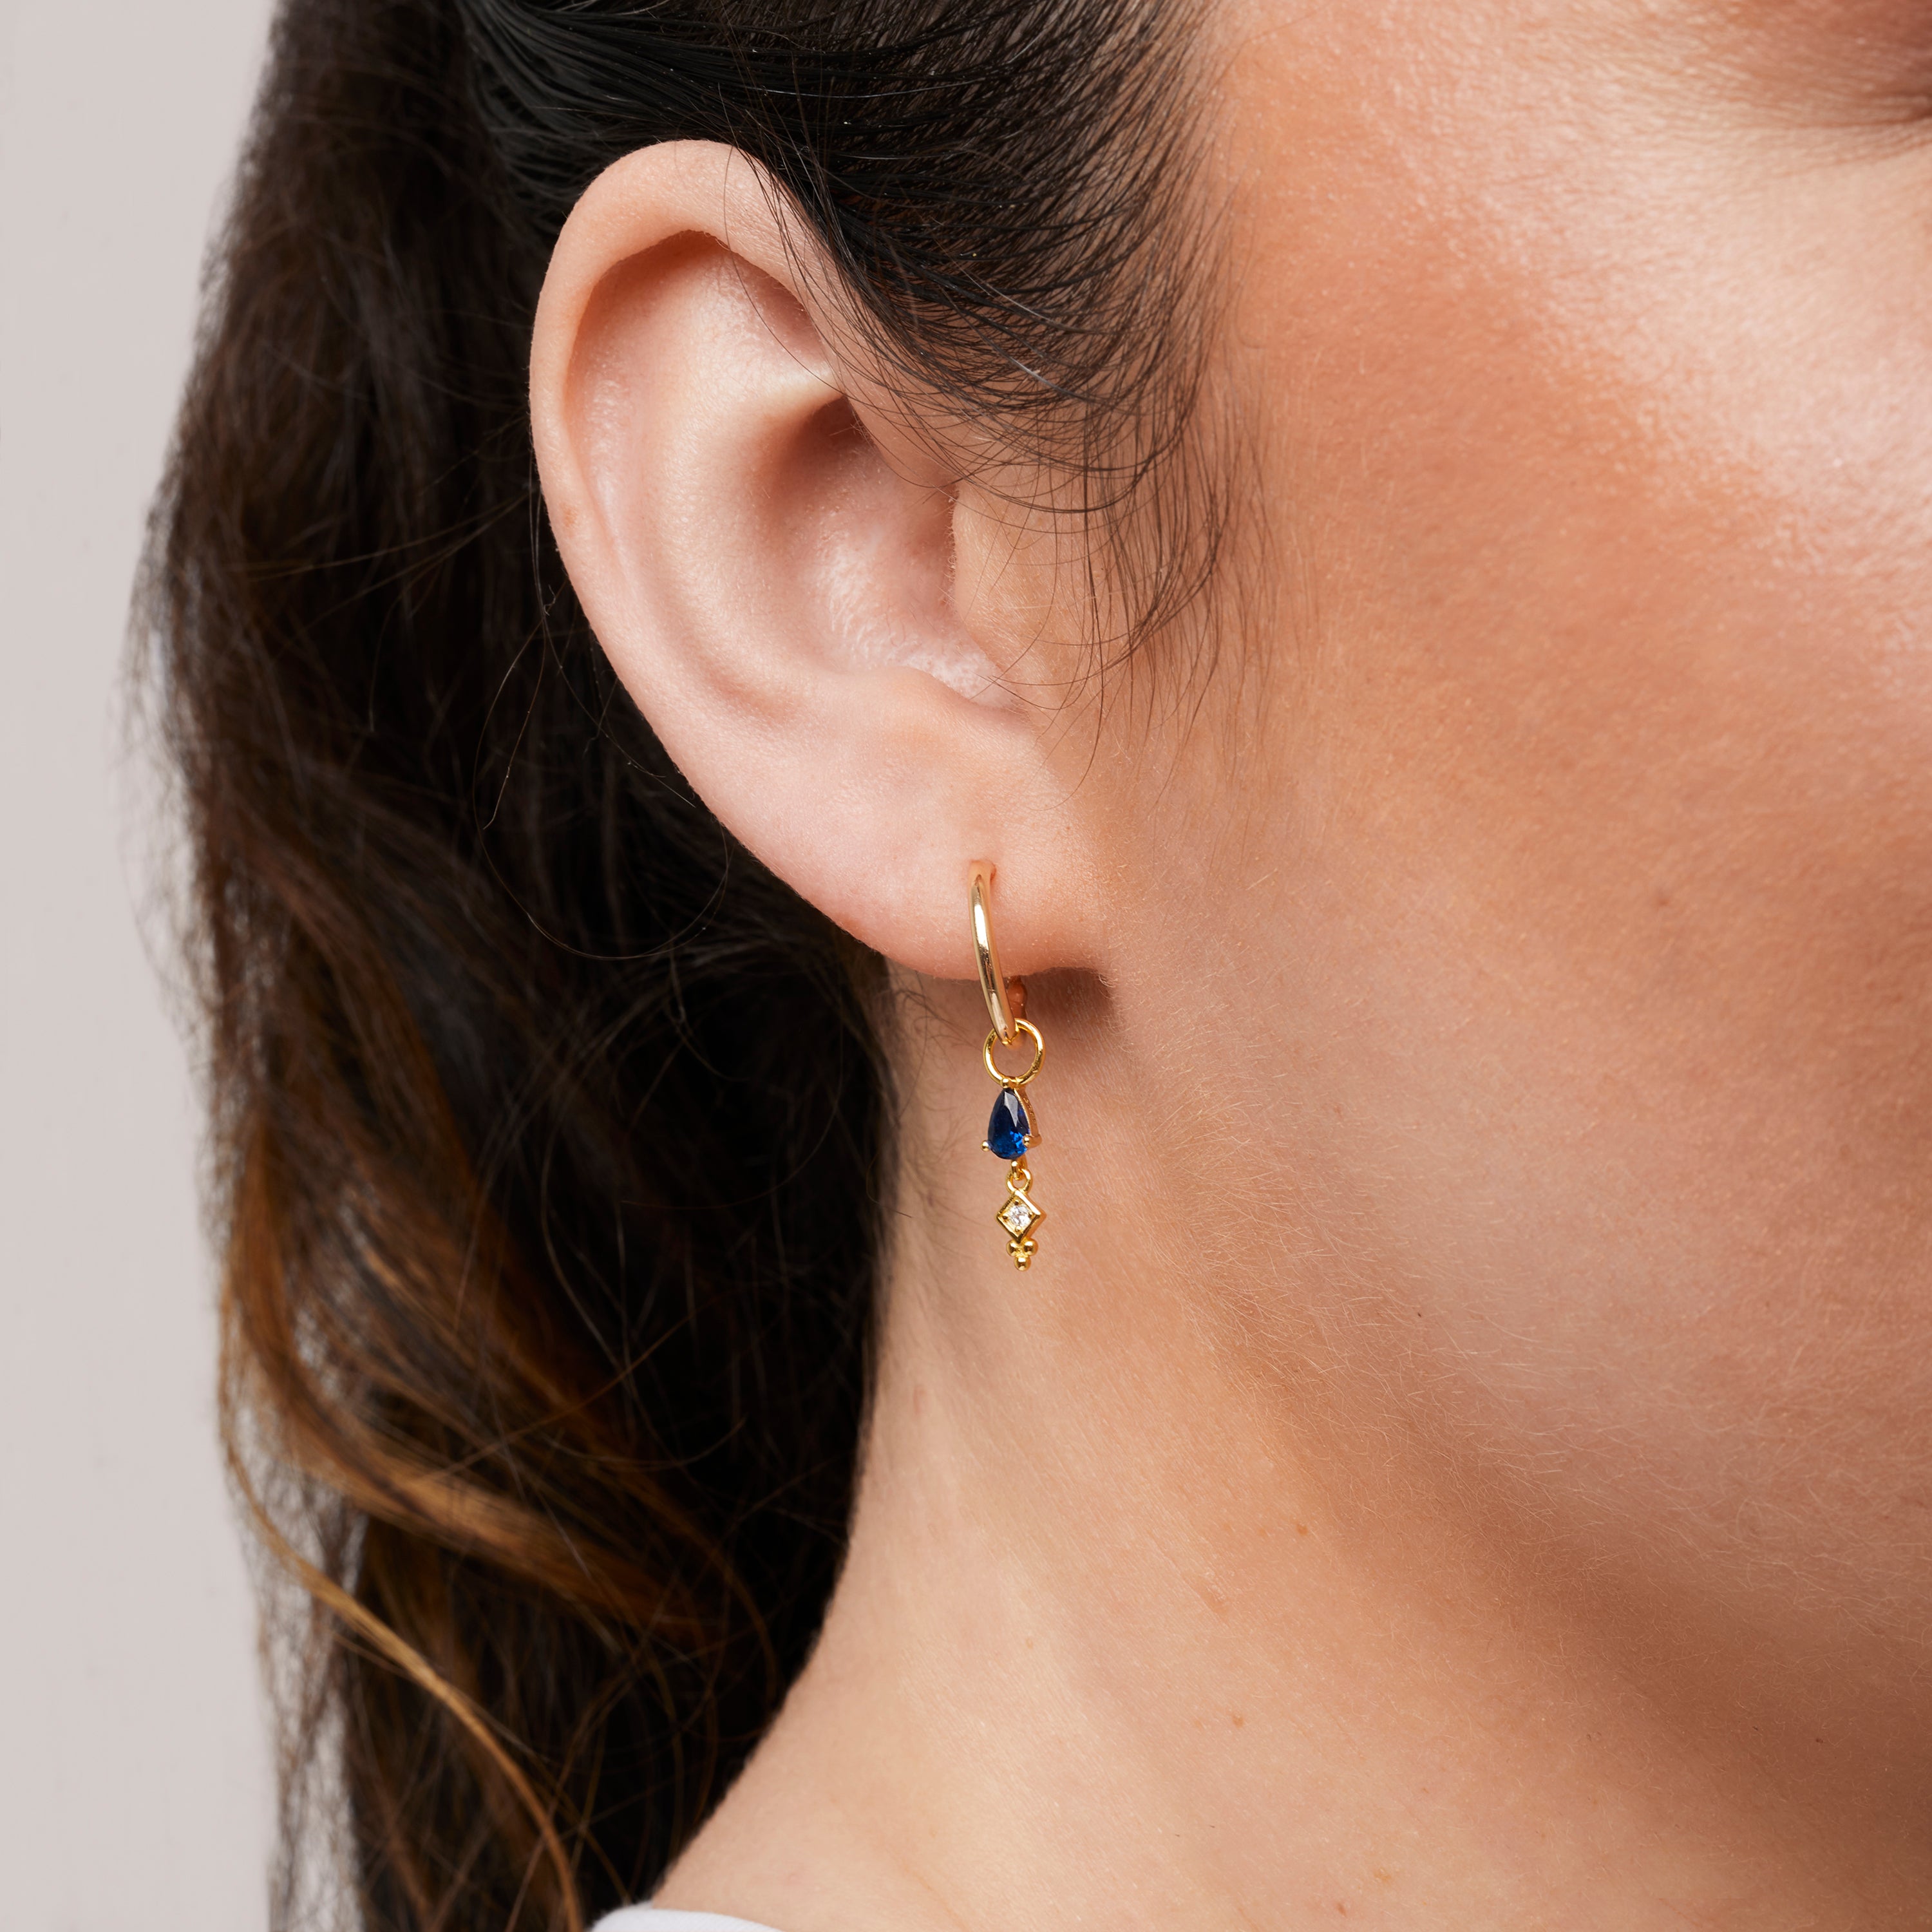 A model wearing the Deco Hoop Charms in Gold are made with high-quality materials, including 18K gold plating over 925 Sterling Silver. These charms are both non-tarnish and water resistant. The perfect combination of style and durability.